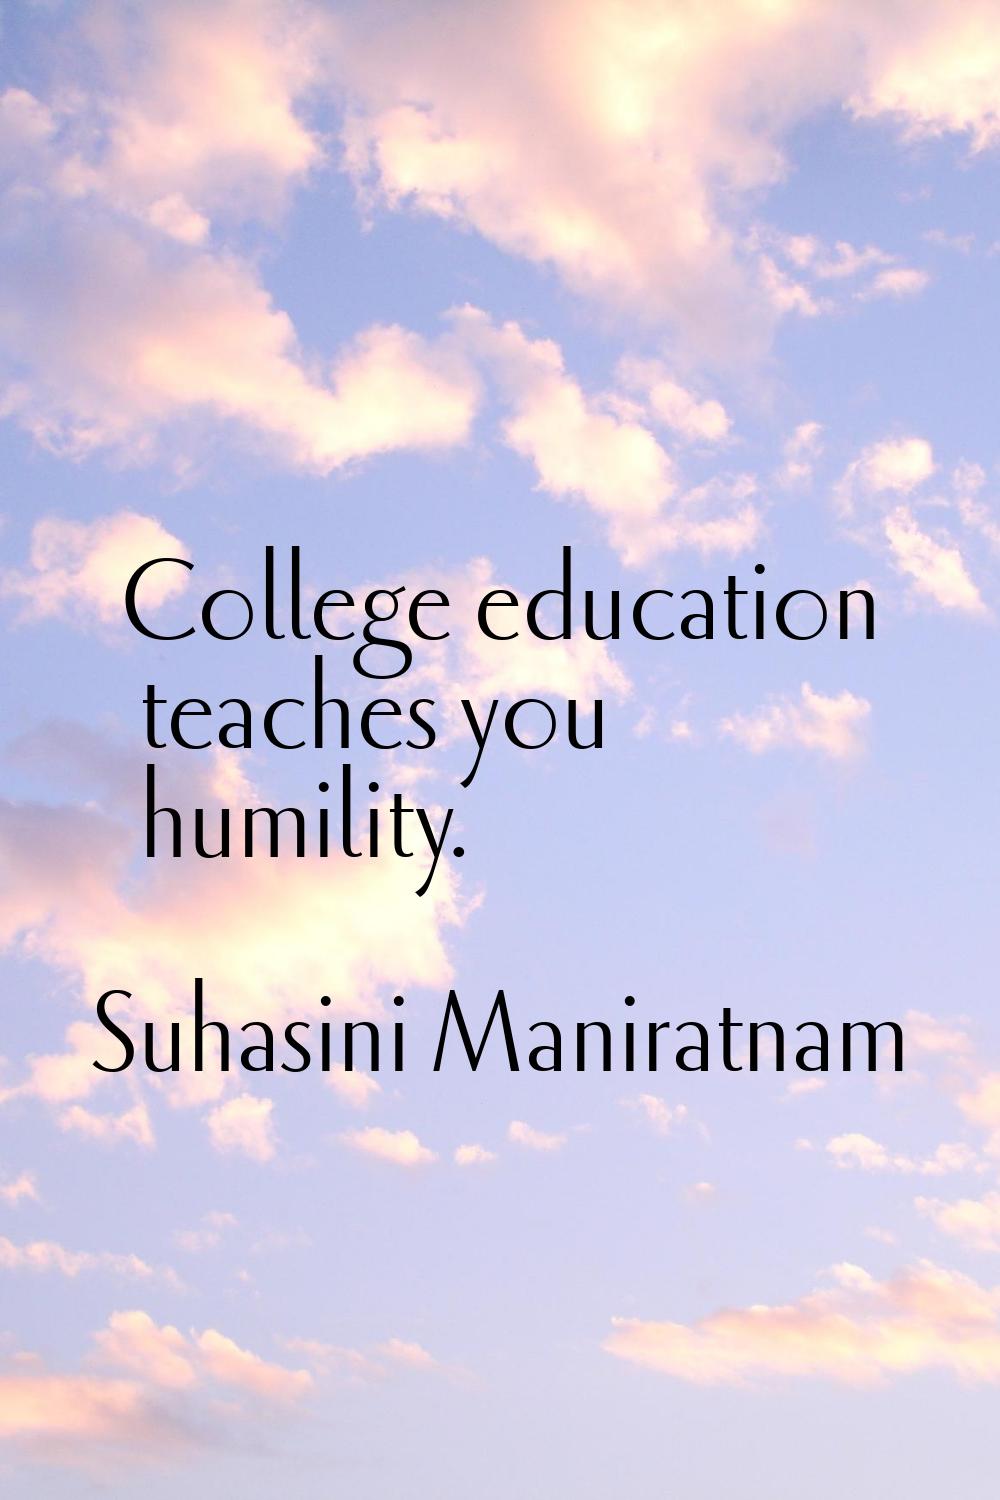 College education teaches you humility.